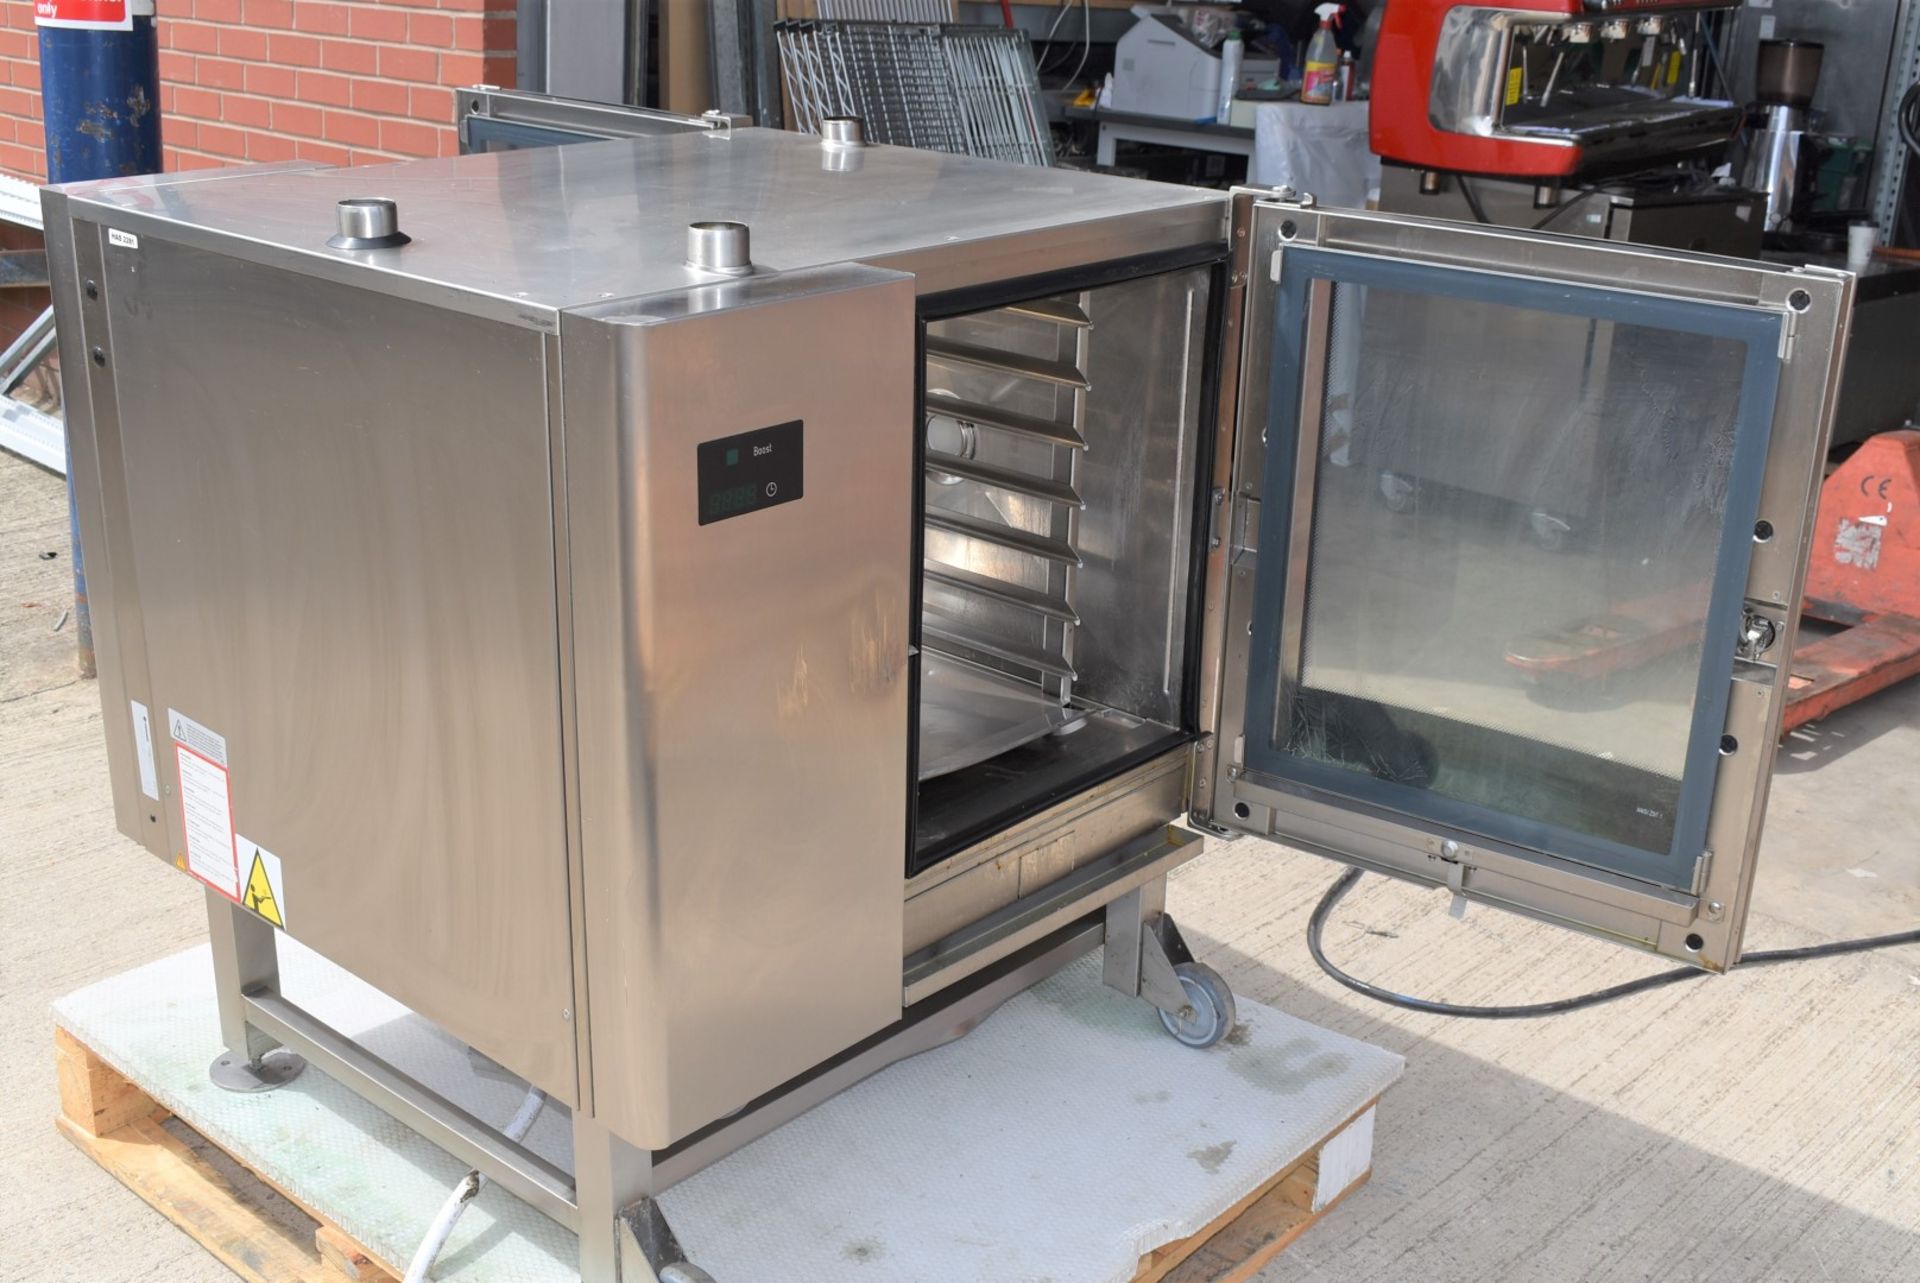 1 x Houno 6 Grid Electric Passthrough Door Combi Oven - 3 Phase With Pre-Set Cooking Options - Image 14 of 17